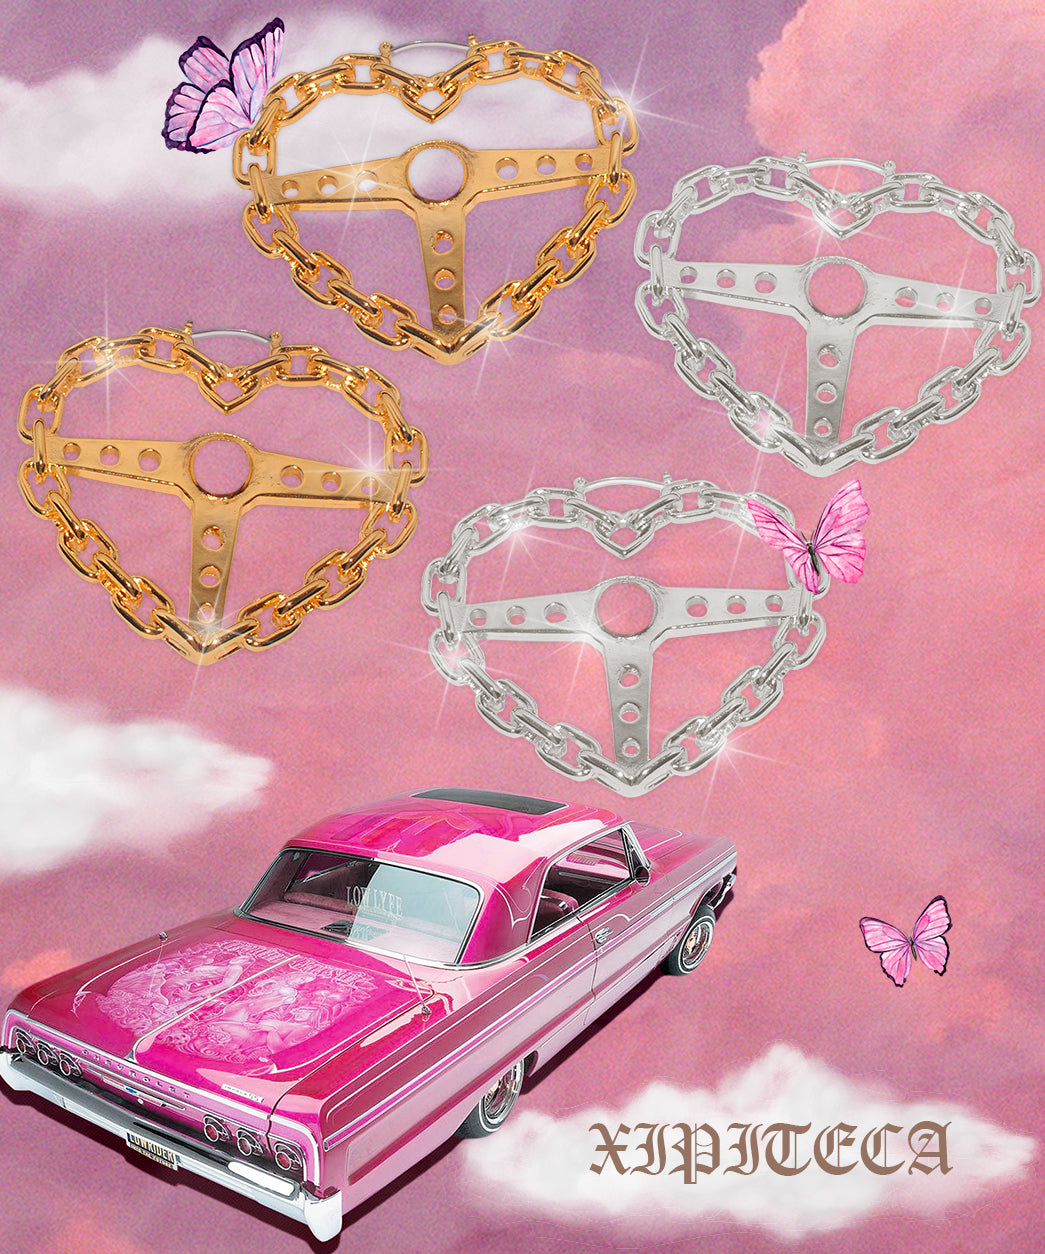 Heart Chain Link Steering Wheel Lowrider Hoop Earrings Vintage Nostalgic Hoop earrings on a pink and purple sky background. Pink lowrider on the left corner. What a beautiful lowrider dream escape. Pink and purple butterflies flirting with the heart steering wheel hoops. Live your lowrider dreams. 